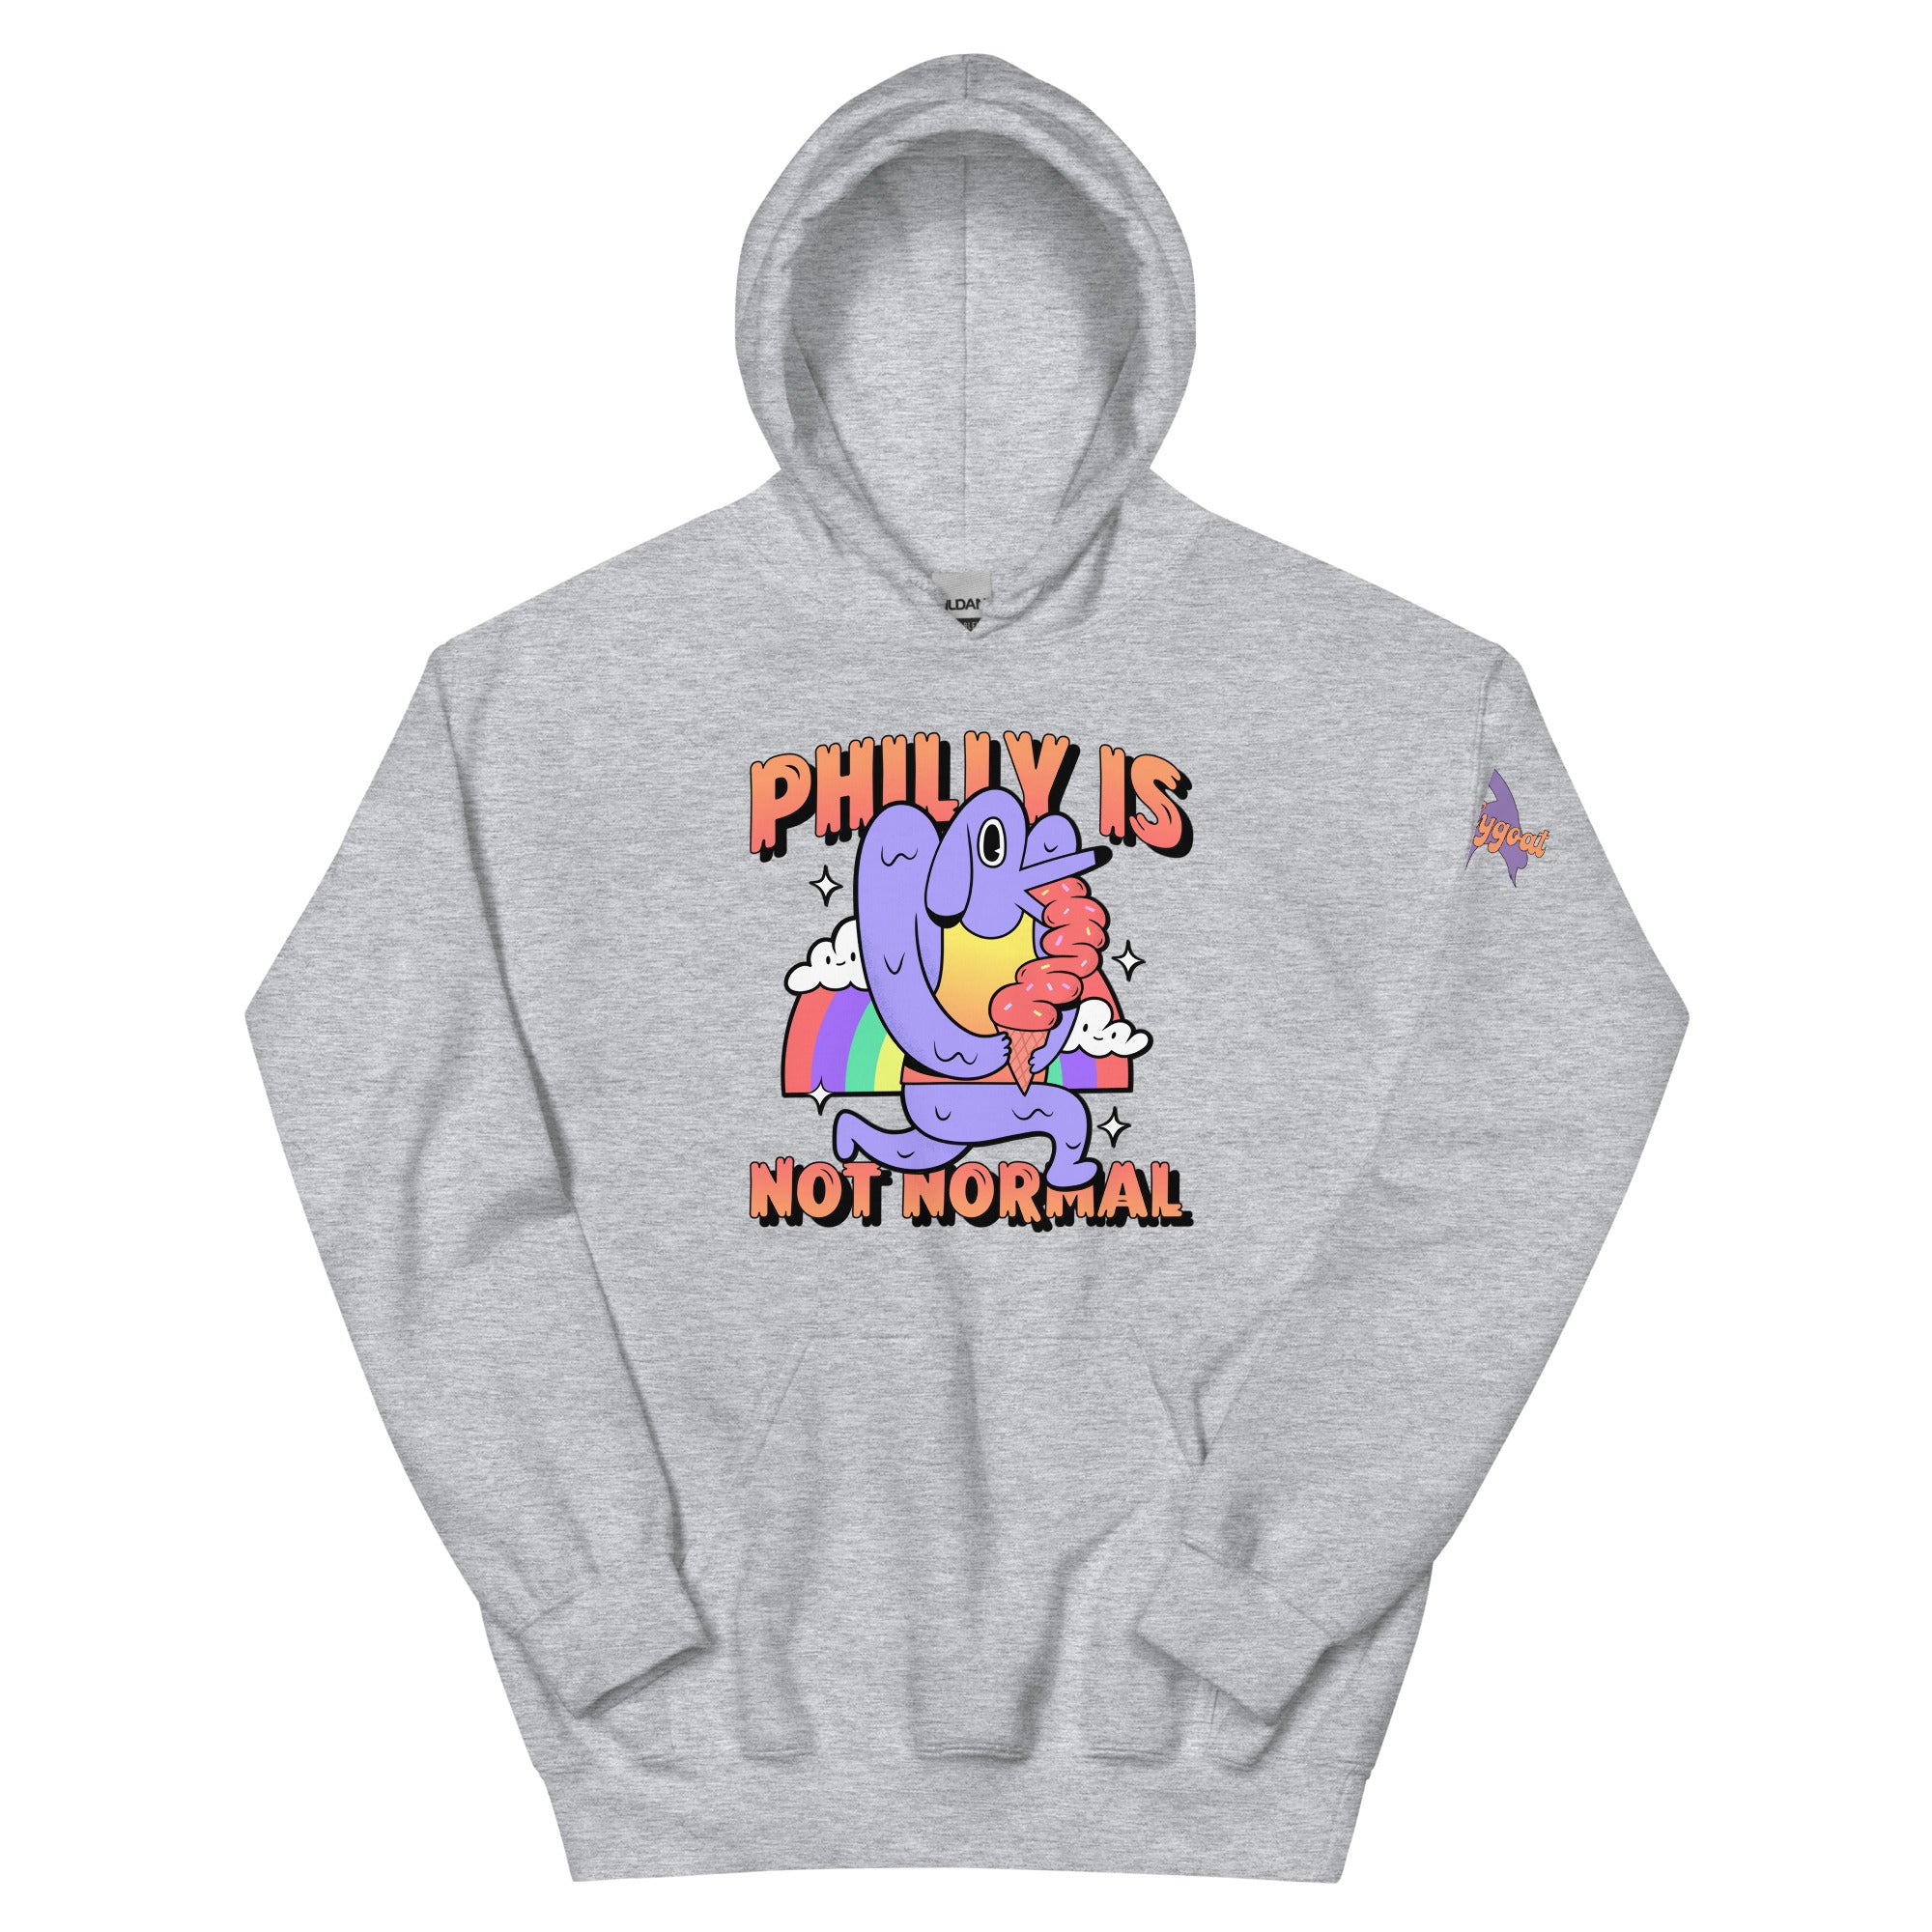 "Philly Is Not Normal" Hoodie